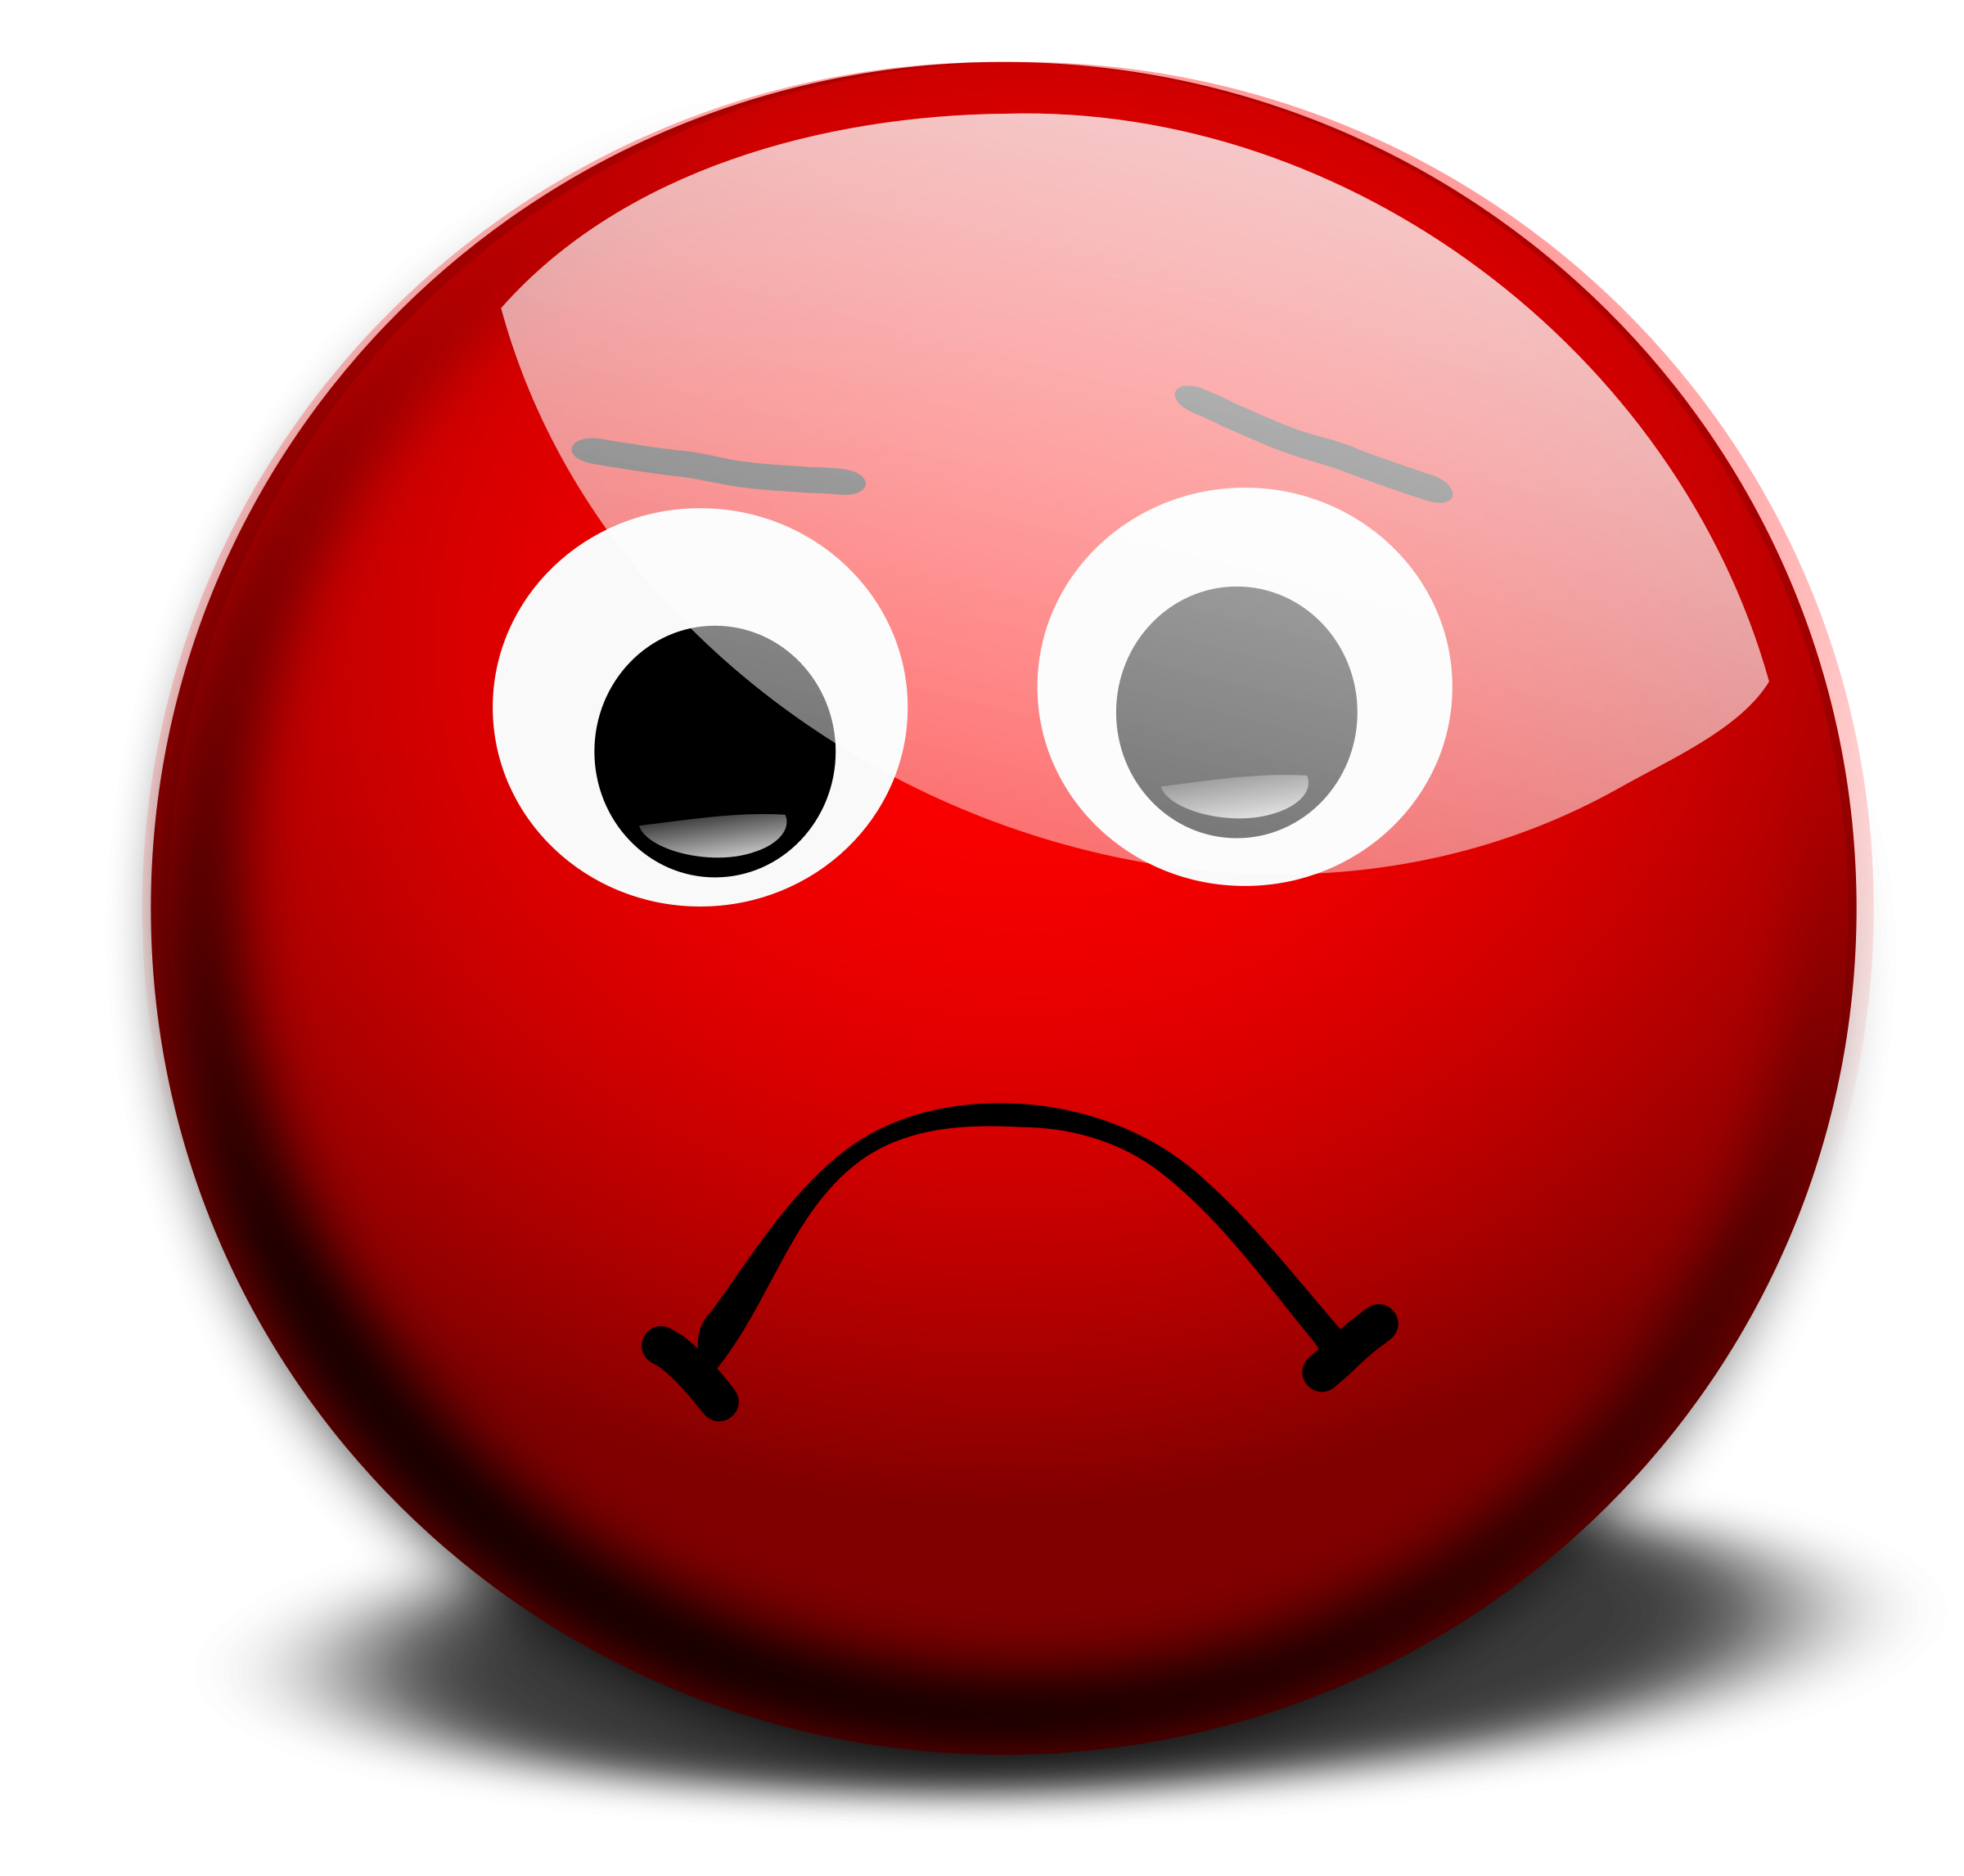 Pictures Of A Sad Face - ClipArt Best